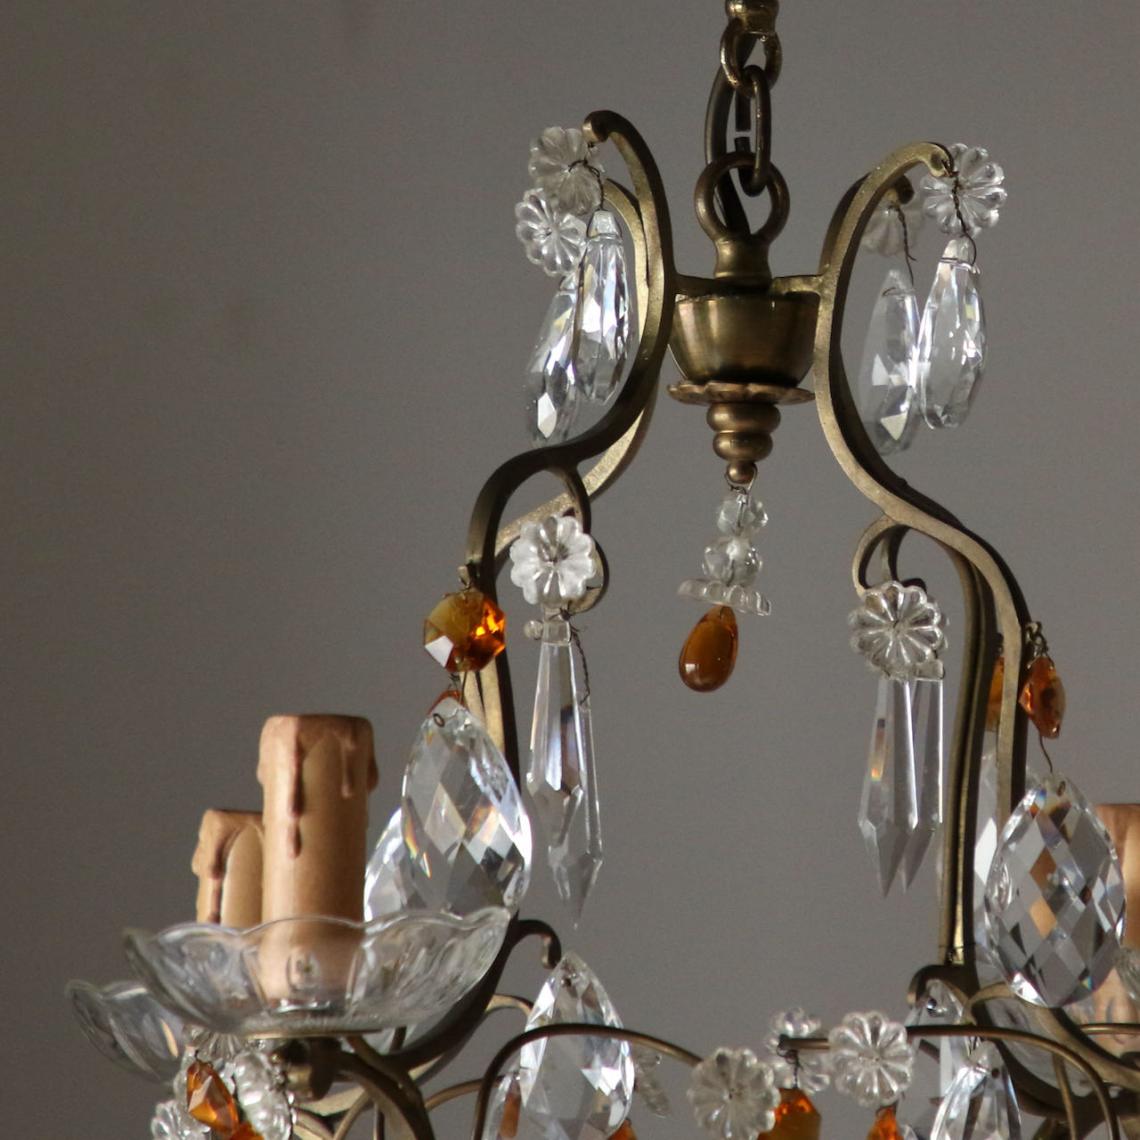 Chandelier with Amber Glass